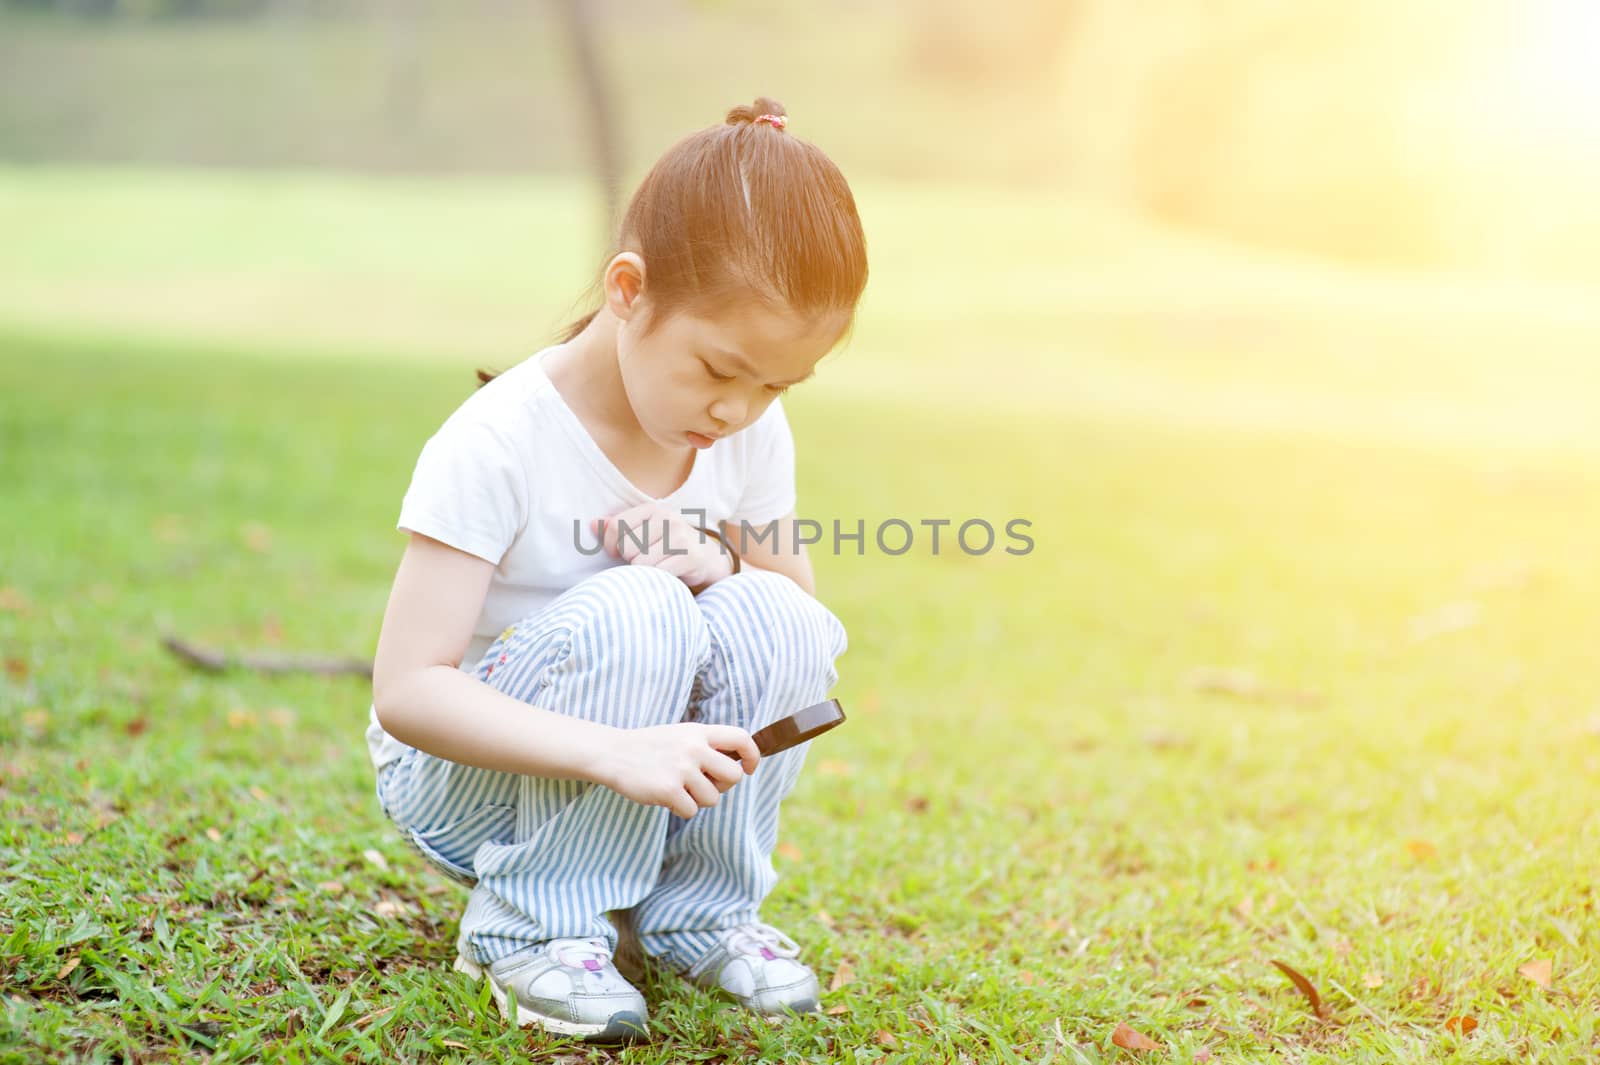 Portrait of Asian school kid with magnifier glass exploring nature at park. Little girl having fun outdoors. Morning sun flare background.